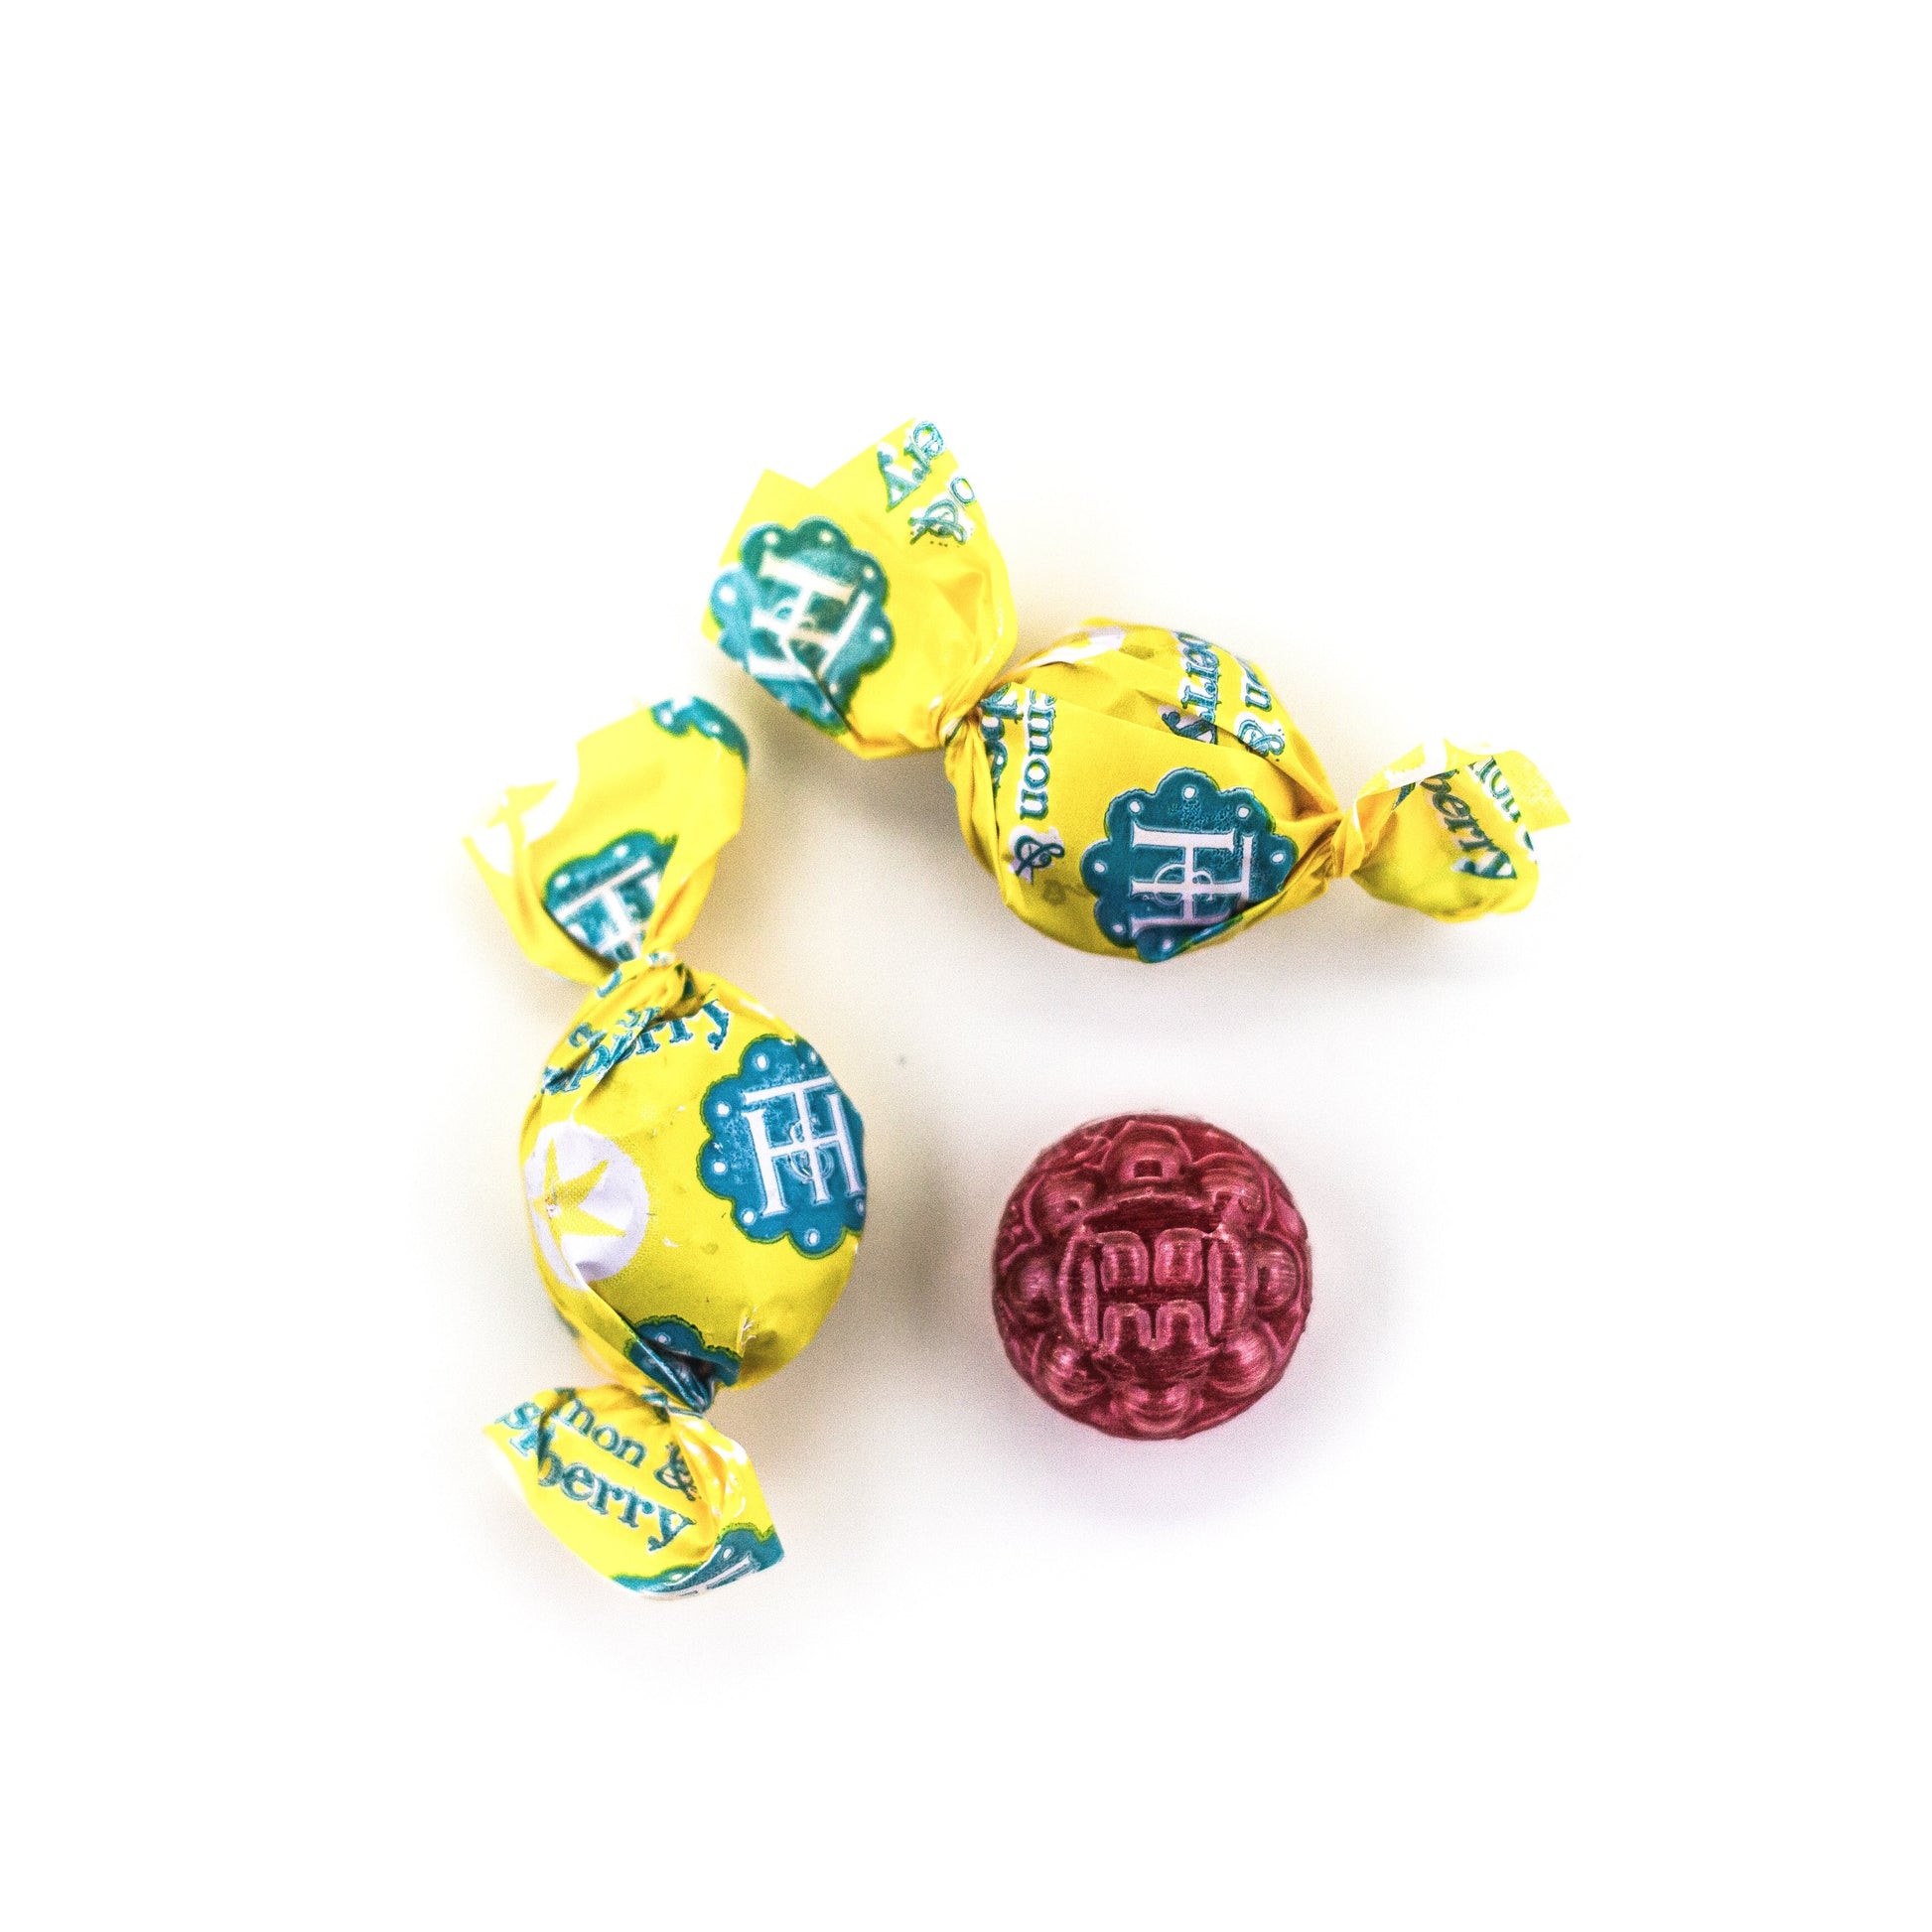 Two unwrapped and one wrapped Meyer Lemon & Raspberry Organic Hard Candies